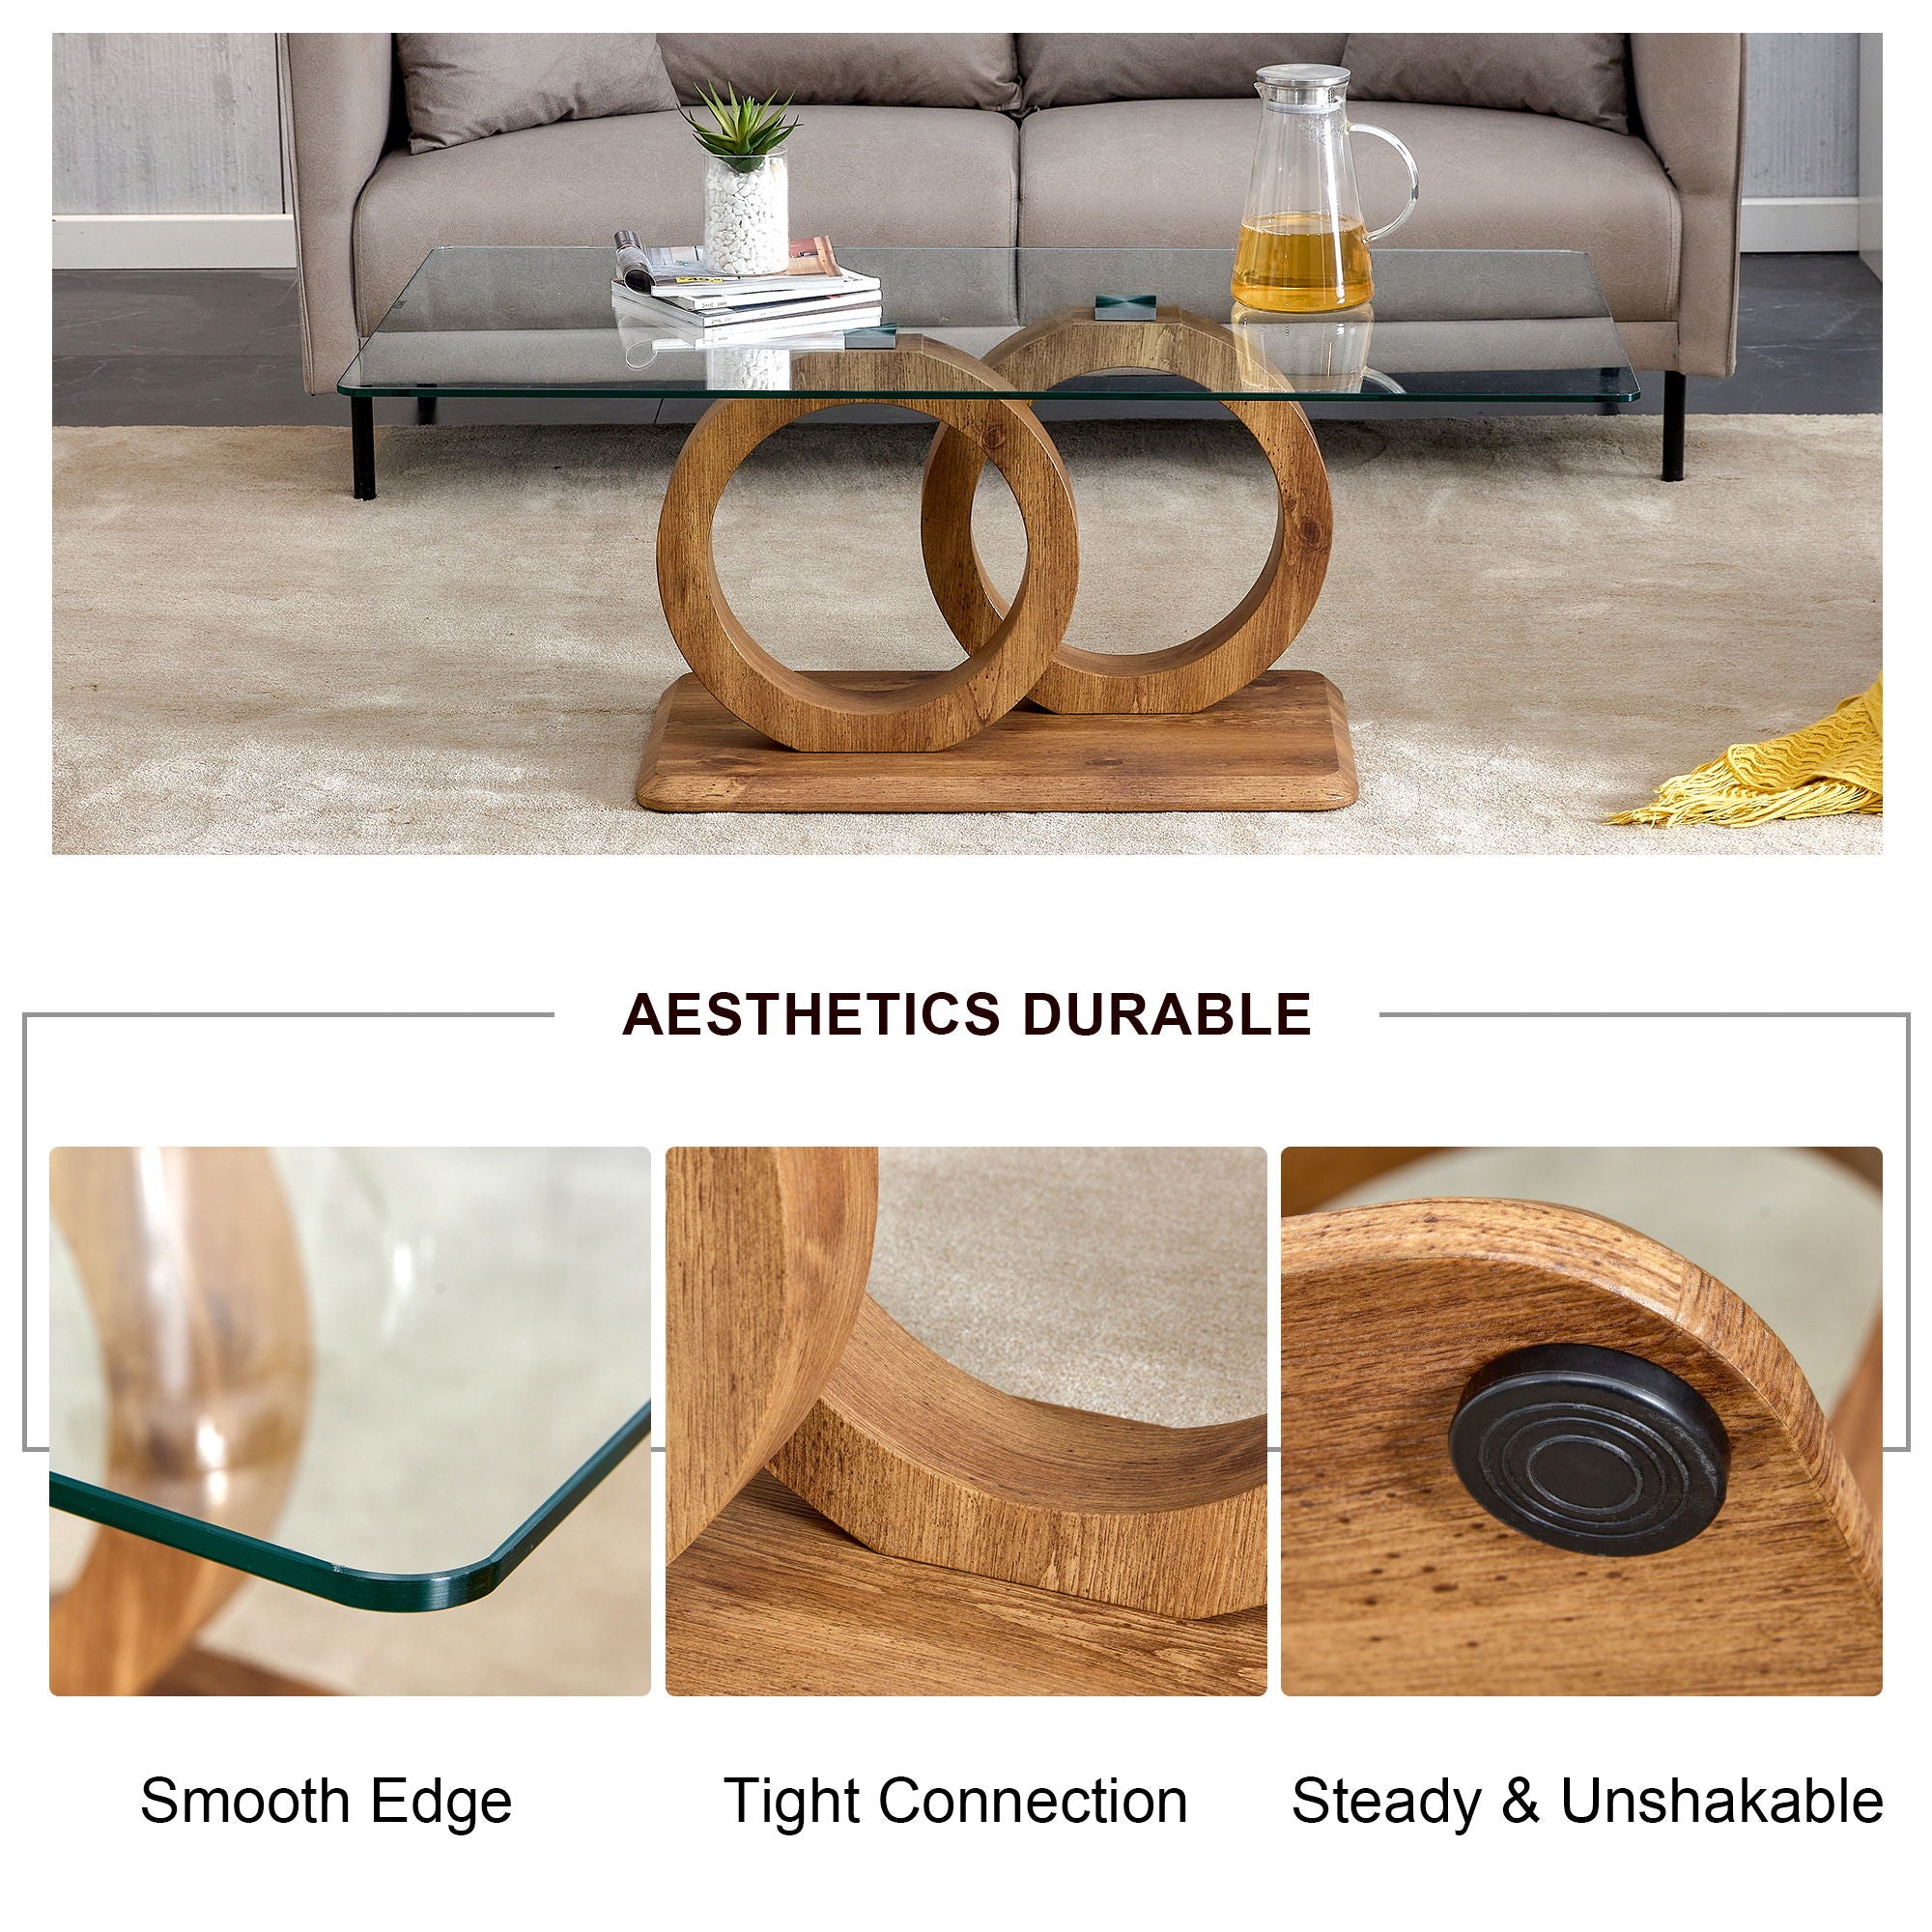 A Rectangular Modern And Fashionable Coffee Table With Tempered Glass Tabletop And Wood Grain Table Legs Suitable For Living Room